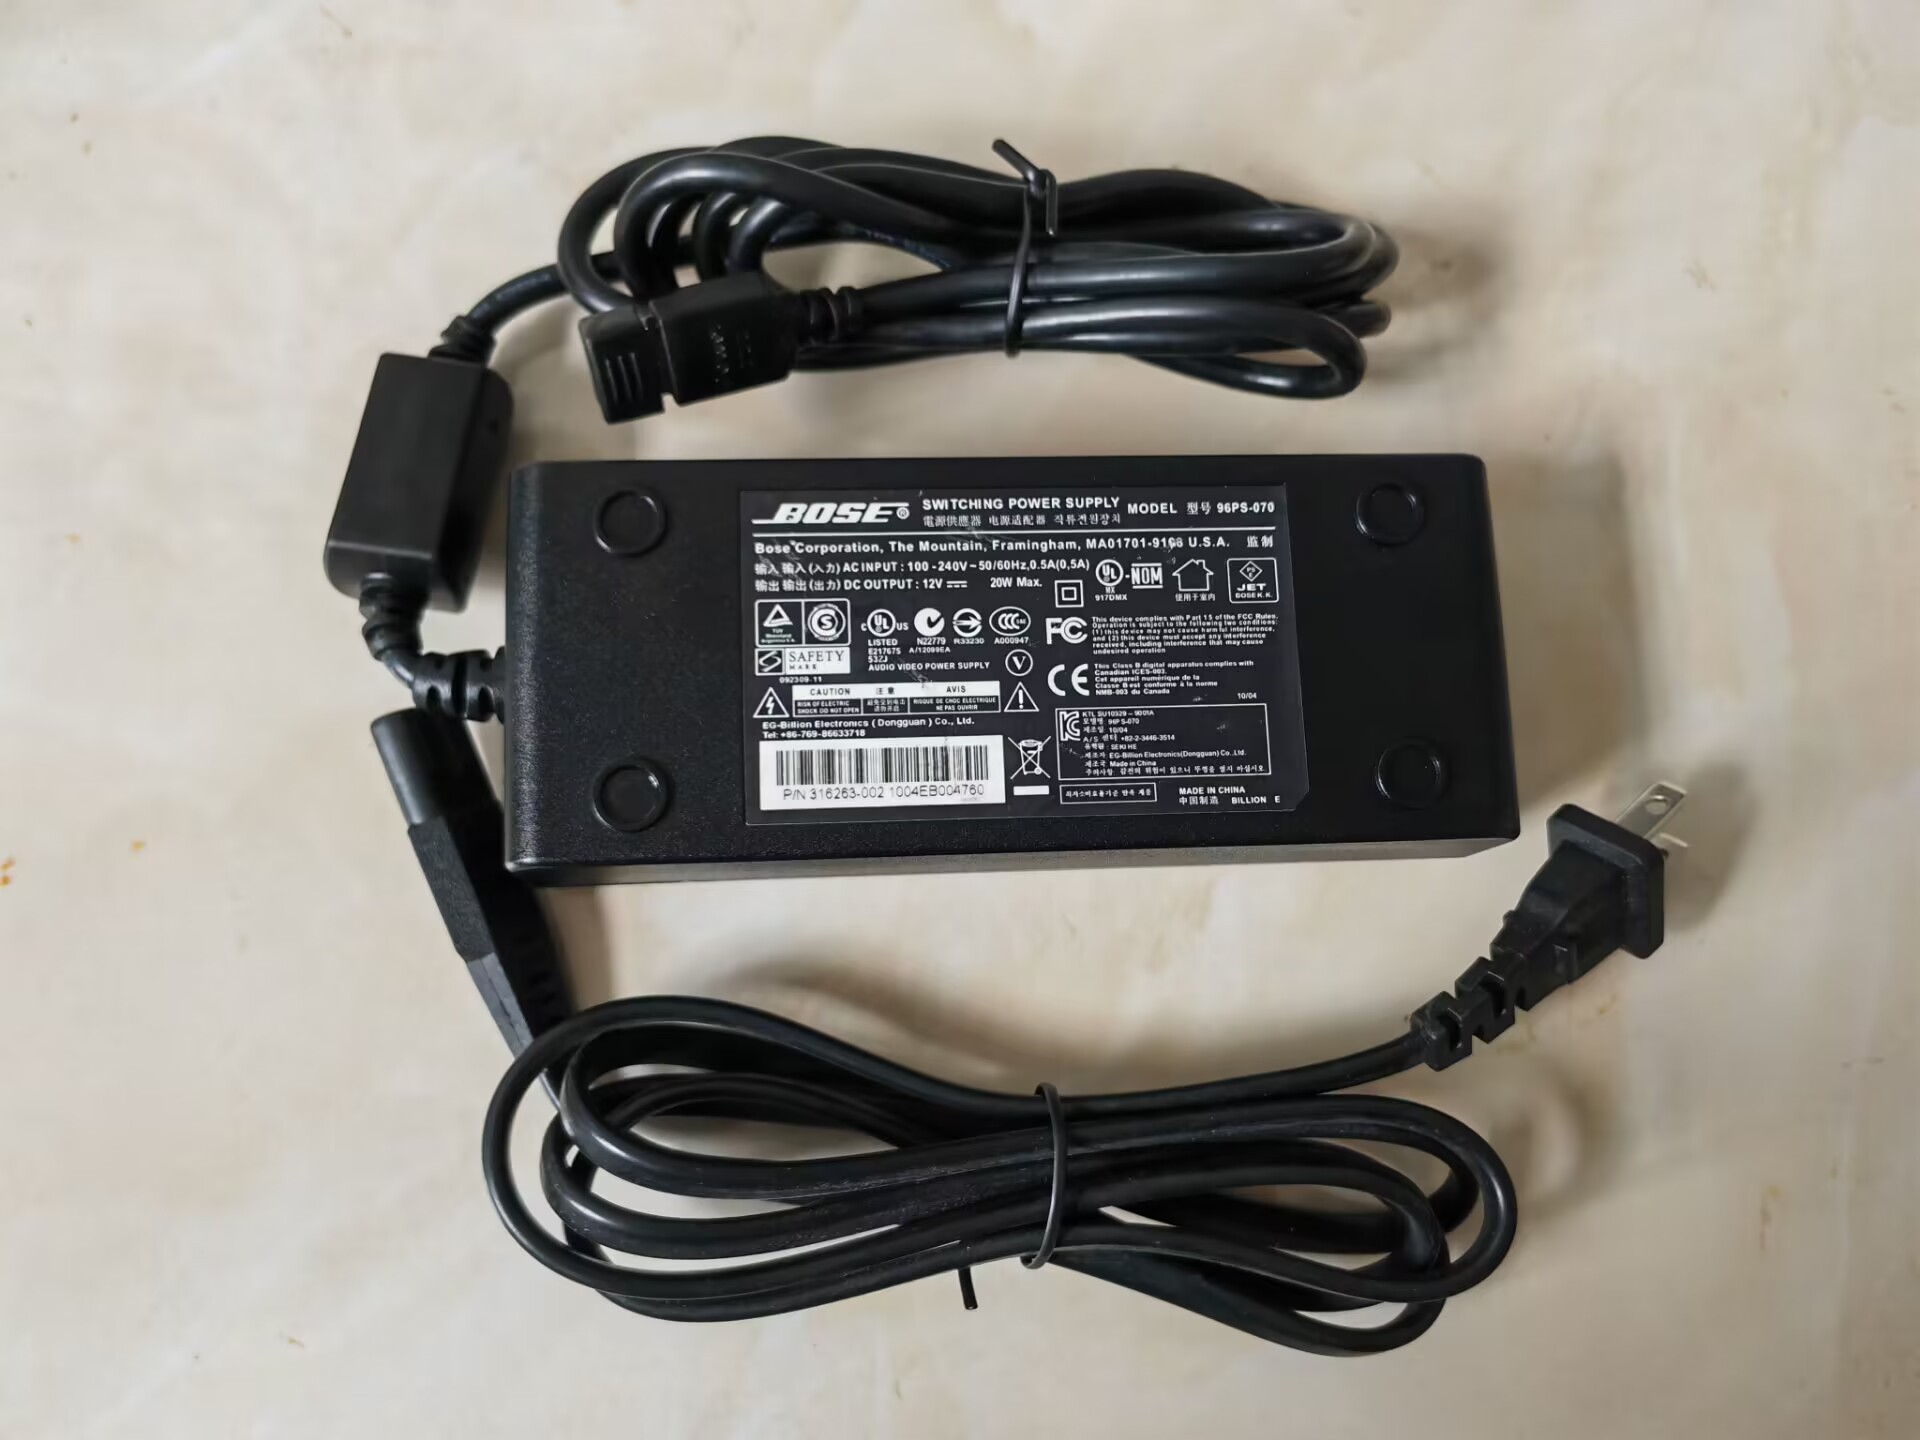 *Brand NEW*POWER Supply BOSE 96PS-070 12V 20W 0.5A AC DC ADAPTHE